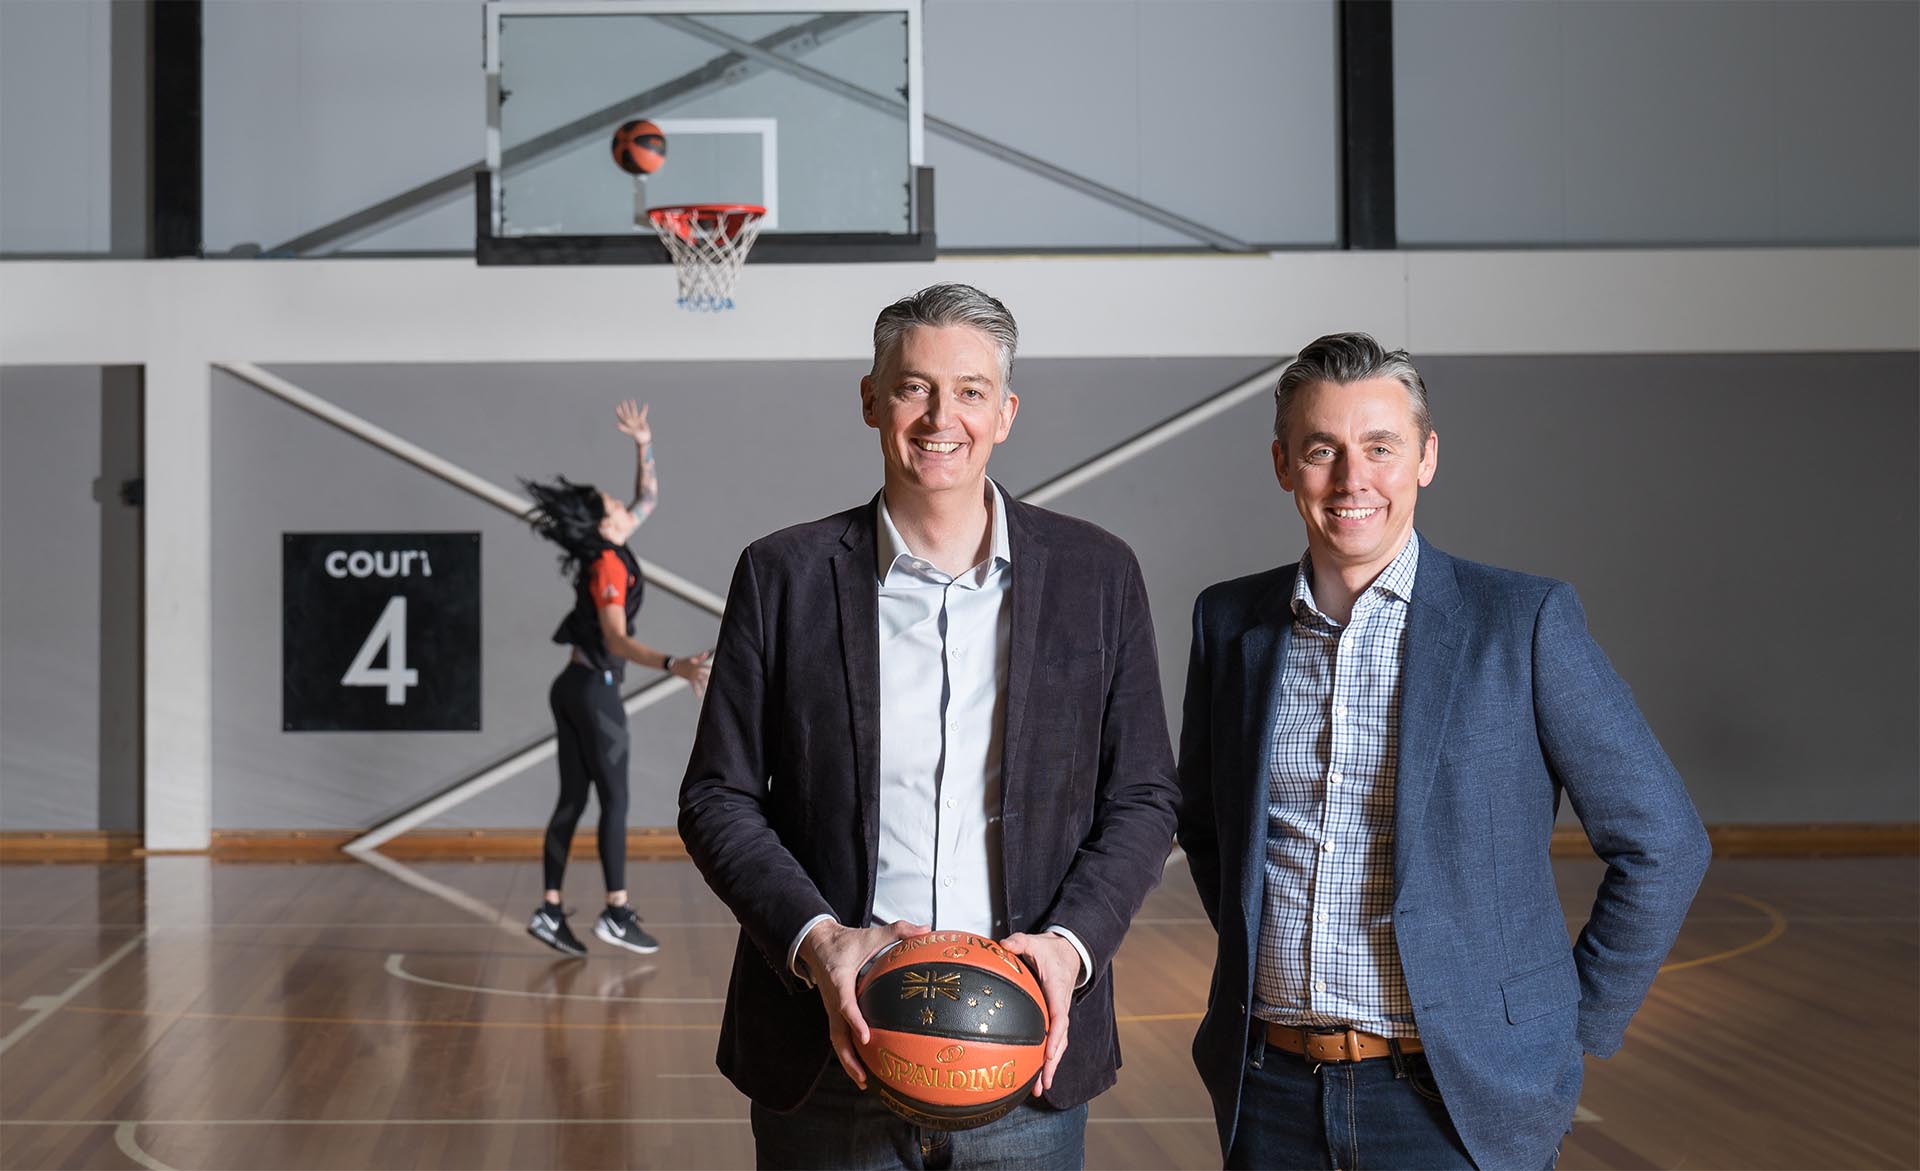 Anthony Moore, CEO of Basketball Australia & Ian Heard, Microsoft General Manager for Digital Workplace and Collaboration